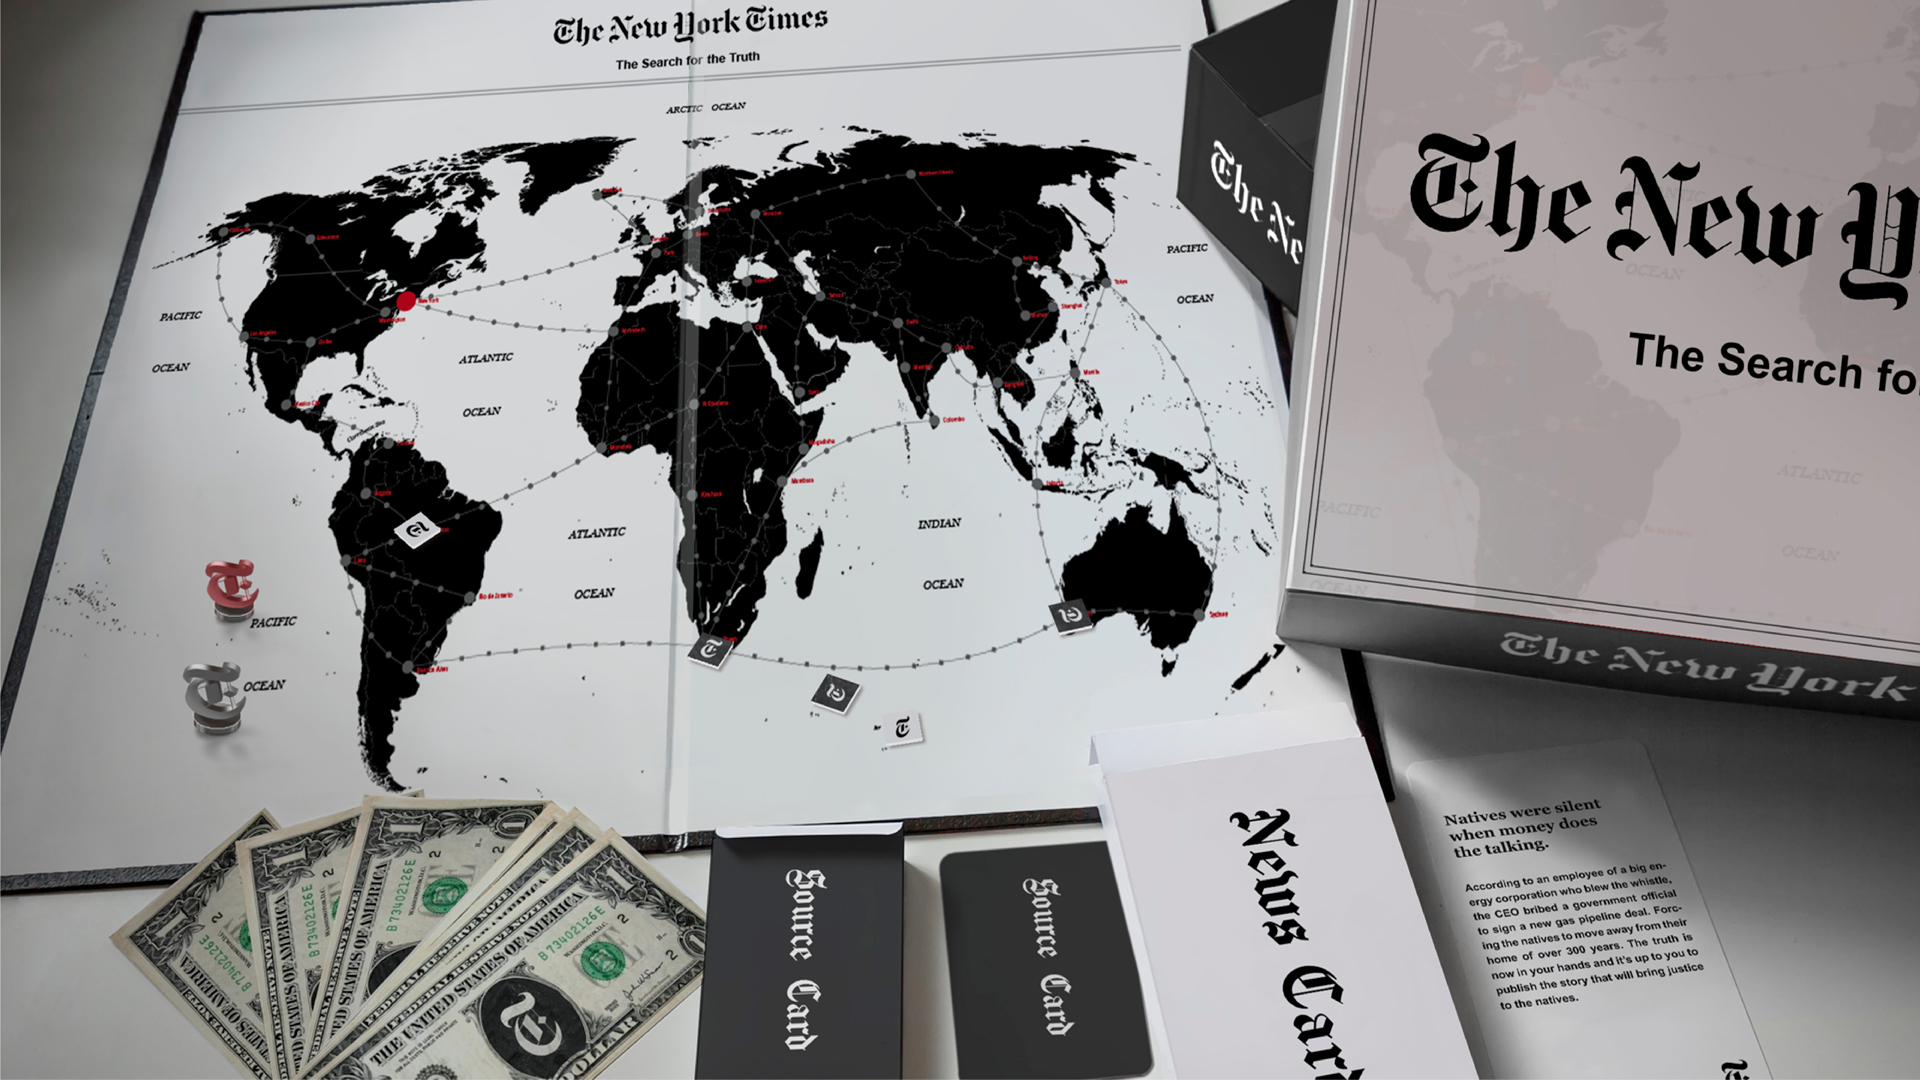 Mockup of the board game set of The New York Times: The Search for the truth